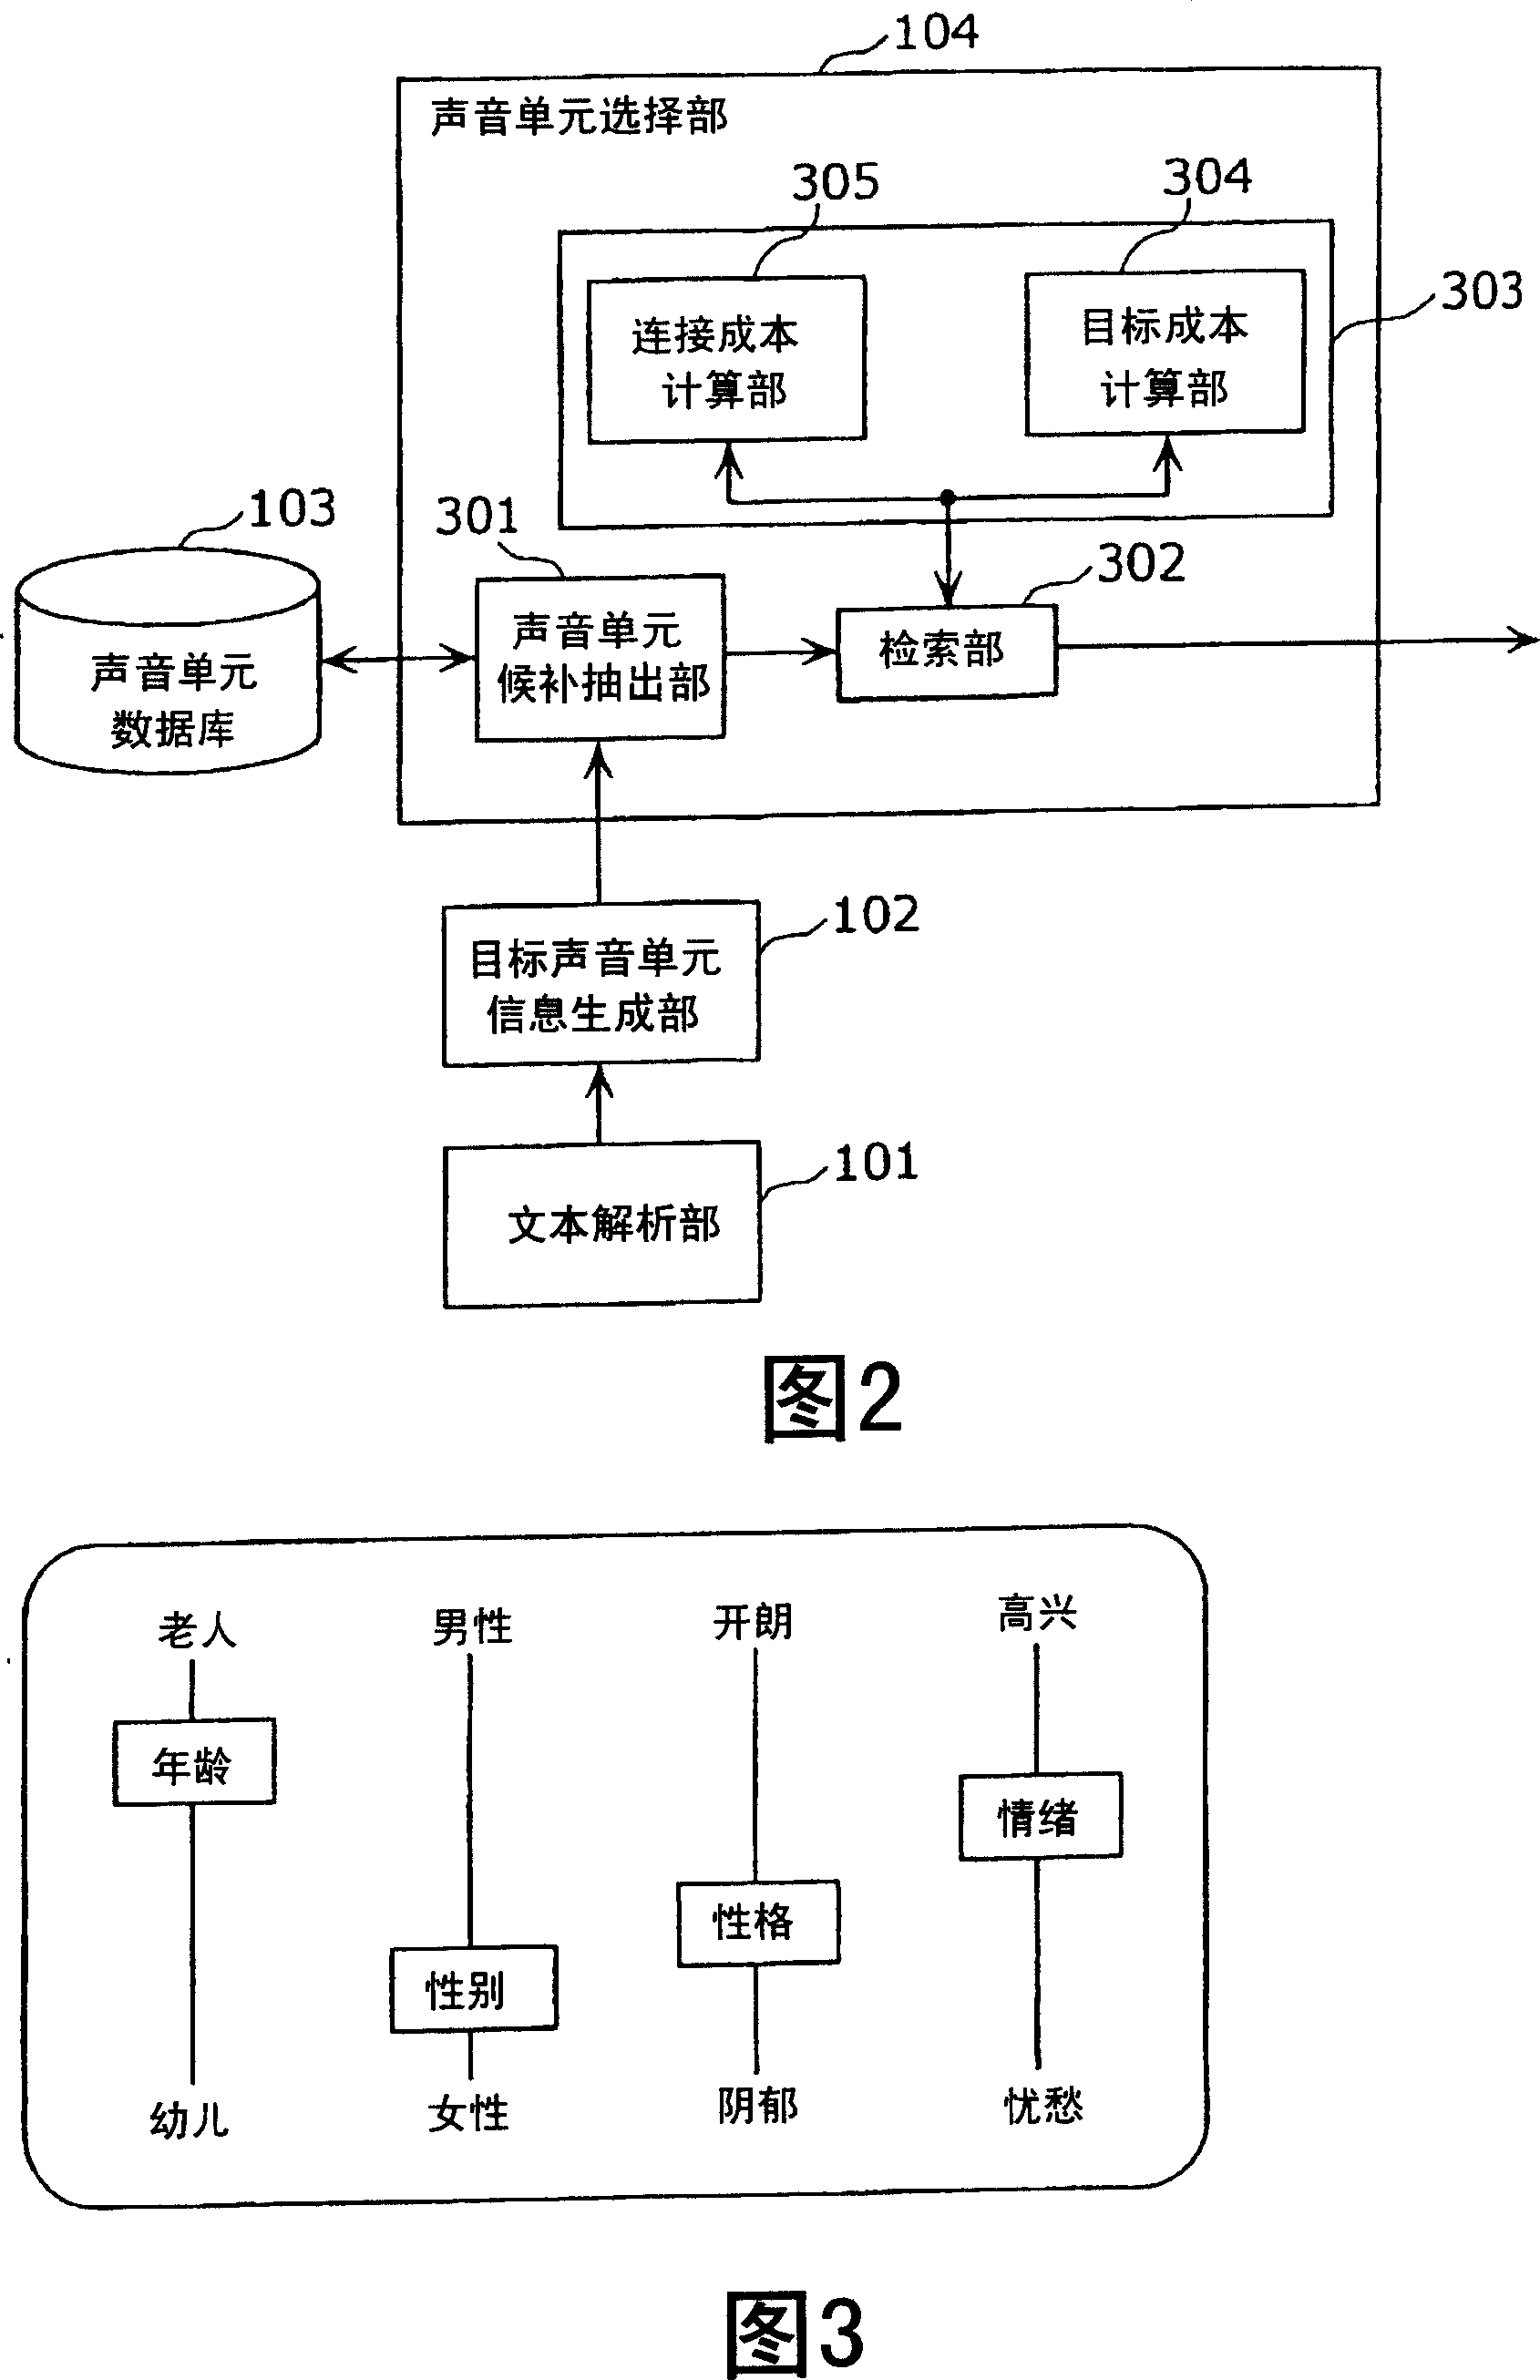 Speech synthesis device and method